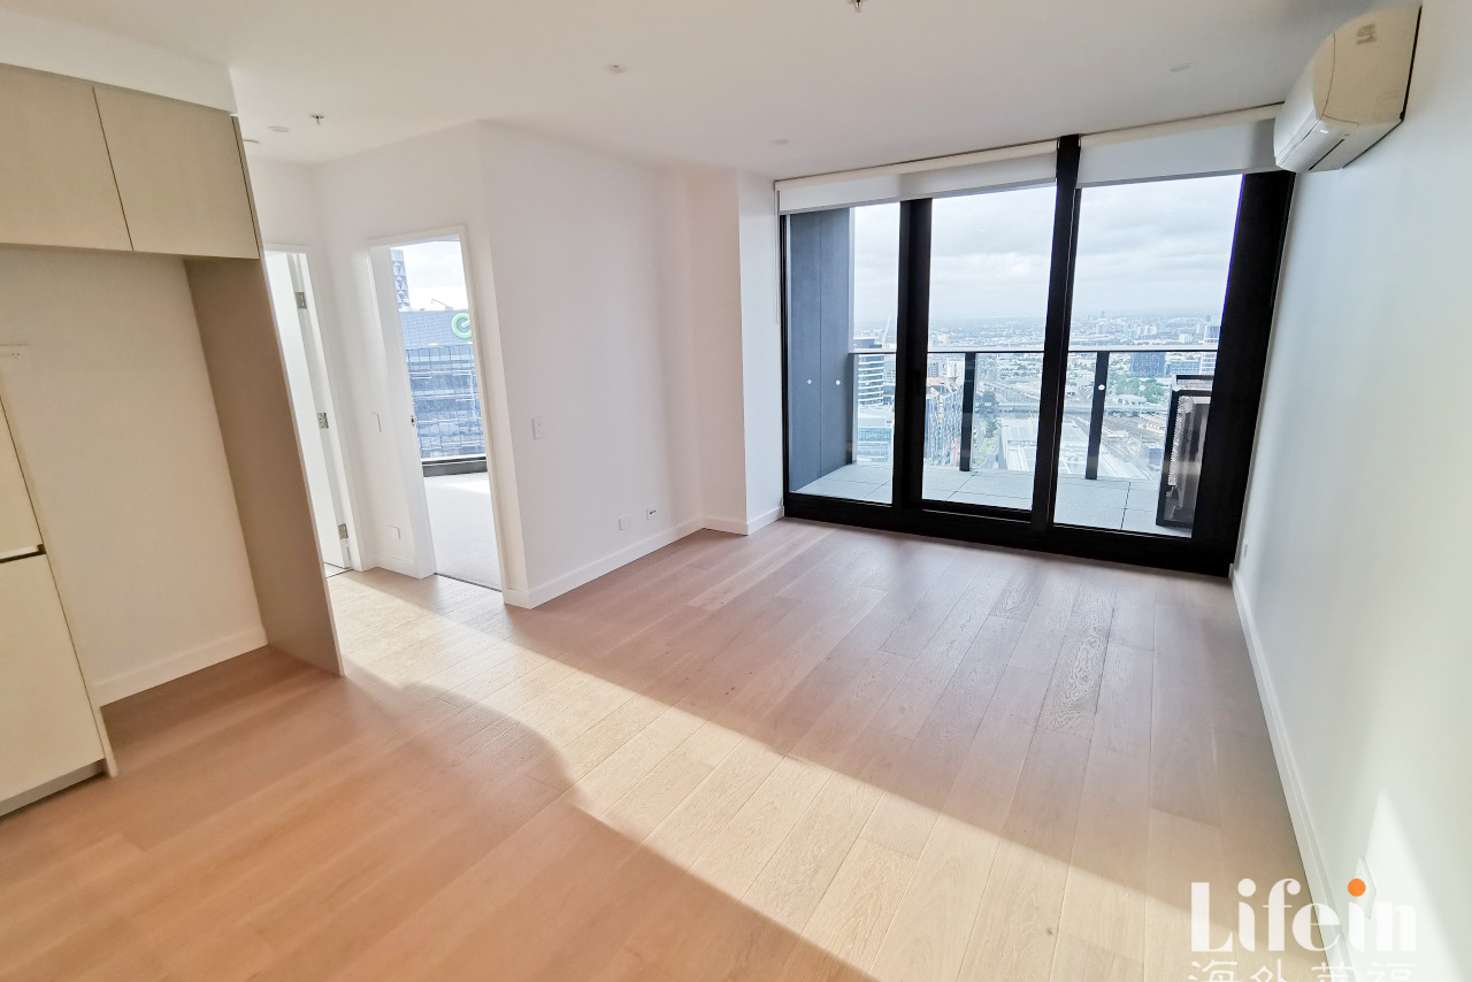 Main view of Homely apartment listing, 3614/628 Flinders Street, Docklands VIC 3008